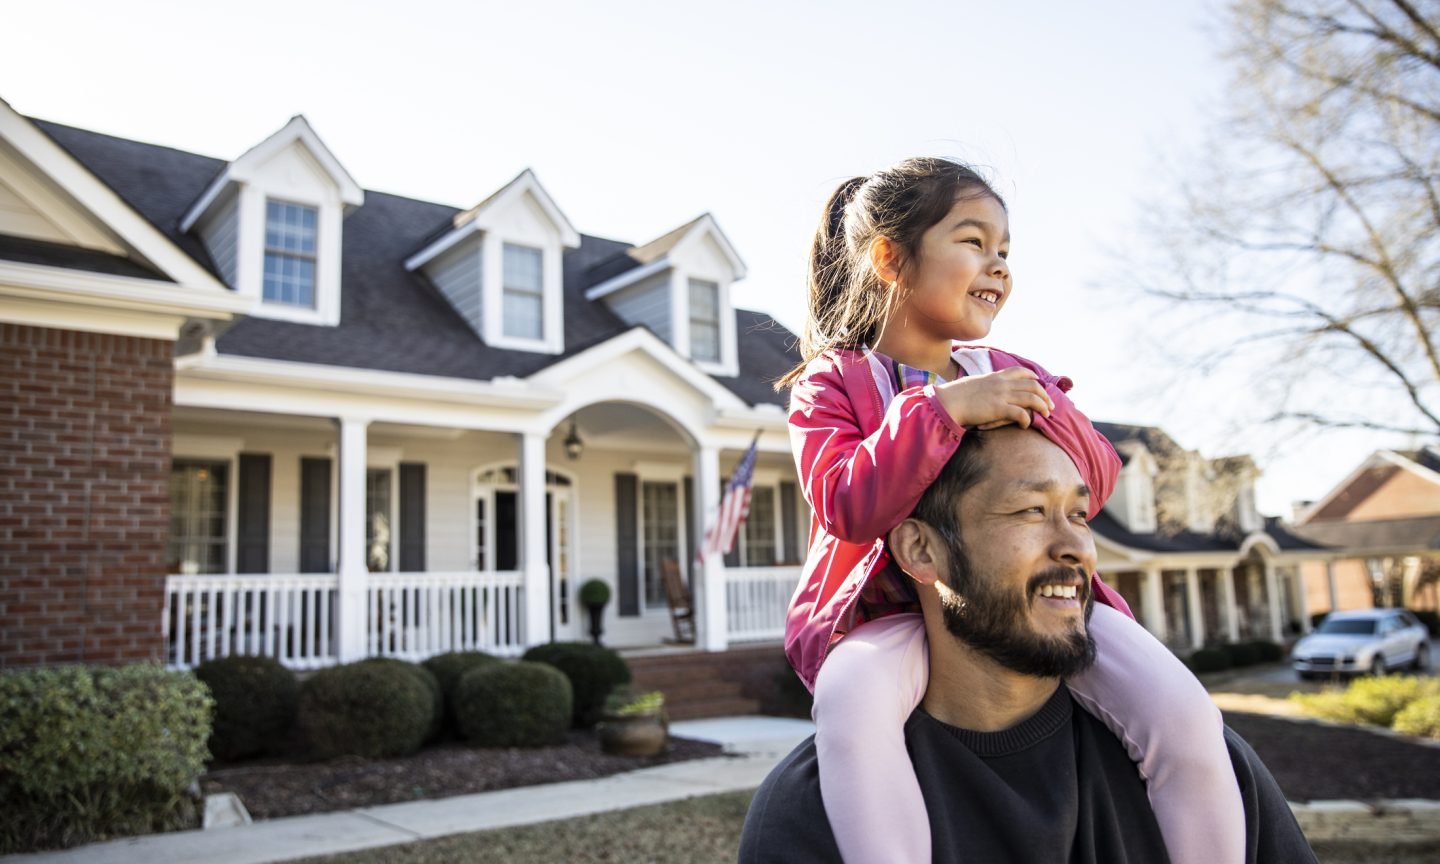 Save on Residence Insurance coverage With These Suggestions – NerdWallet